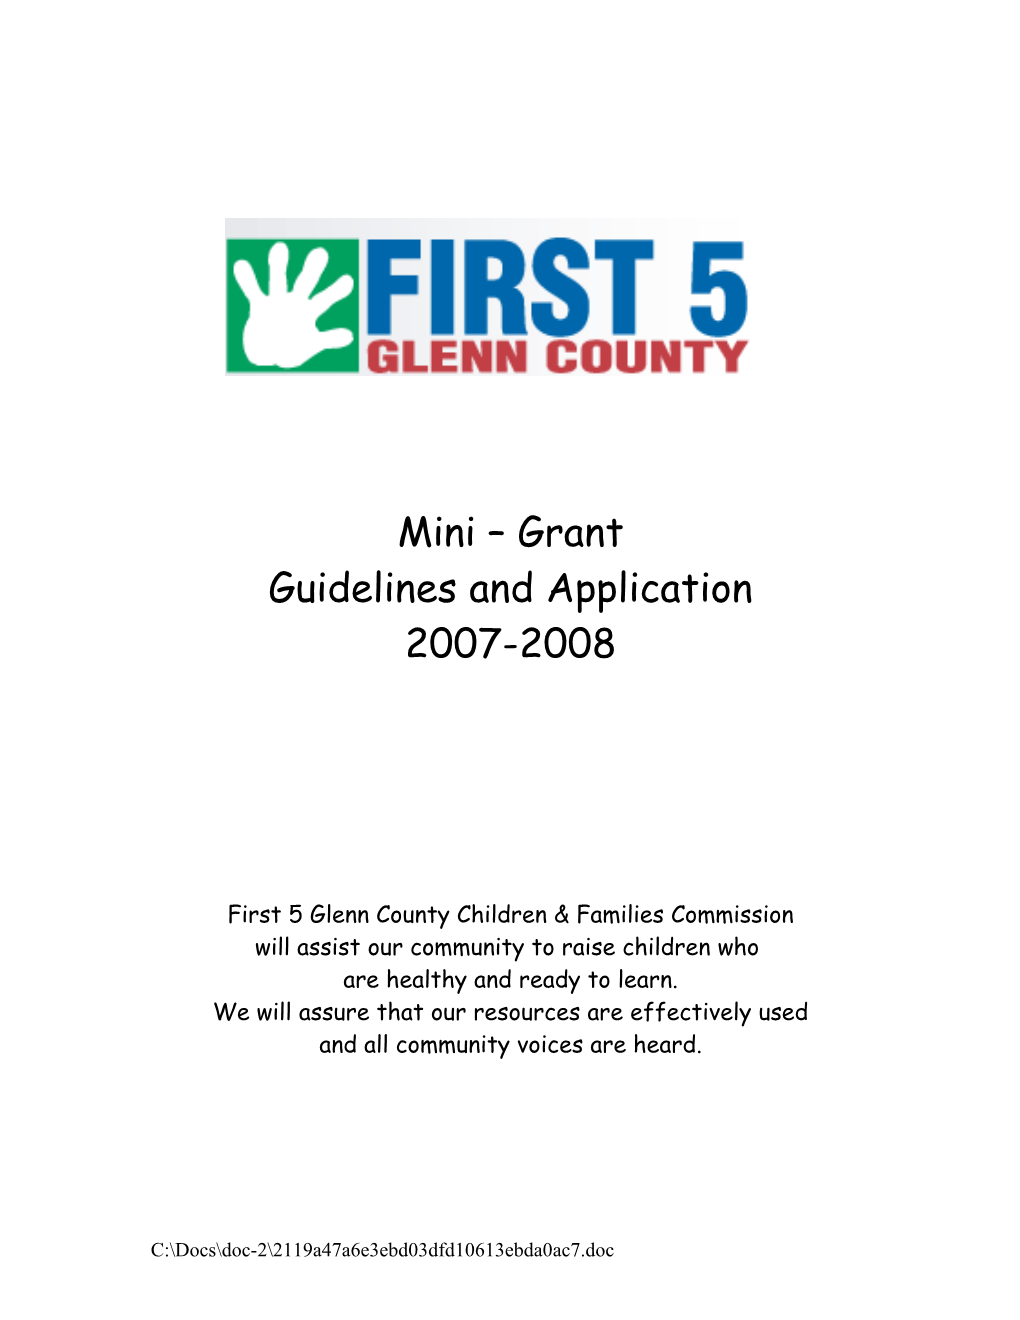 First 5 Glenncounty Children & Families Commission